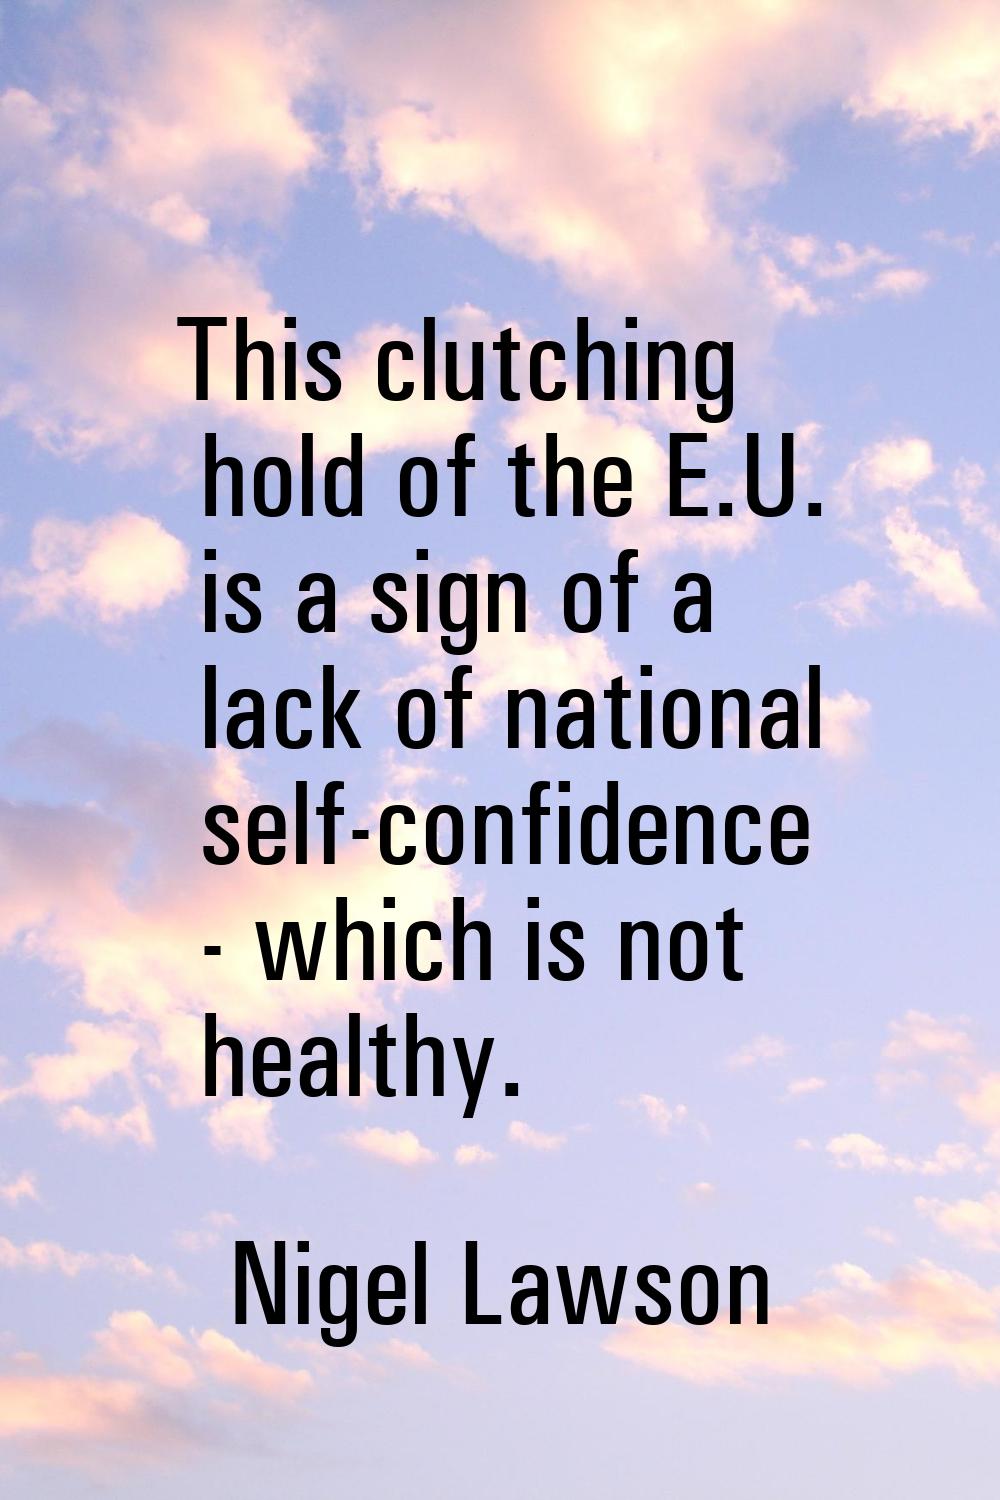 This clutching hold of the E.U. is a sign of a lack of national self-confidence - which is not heal